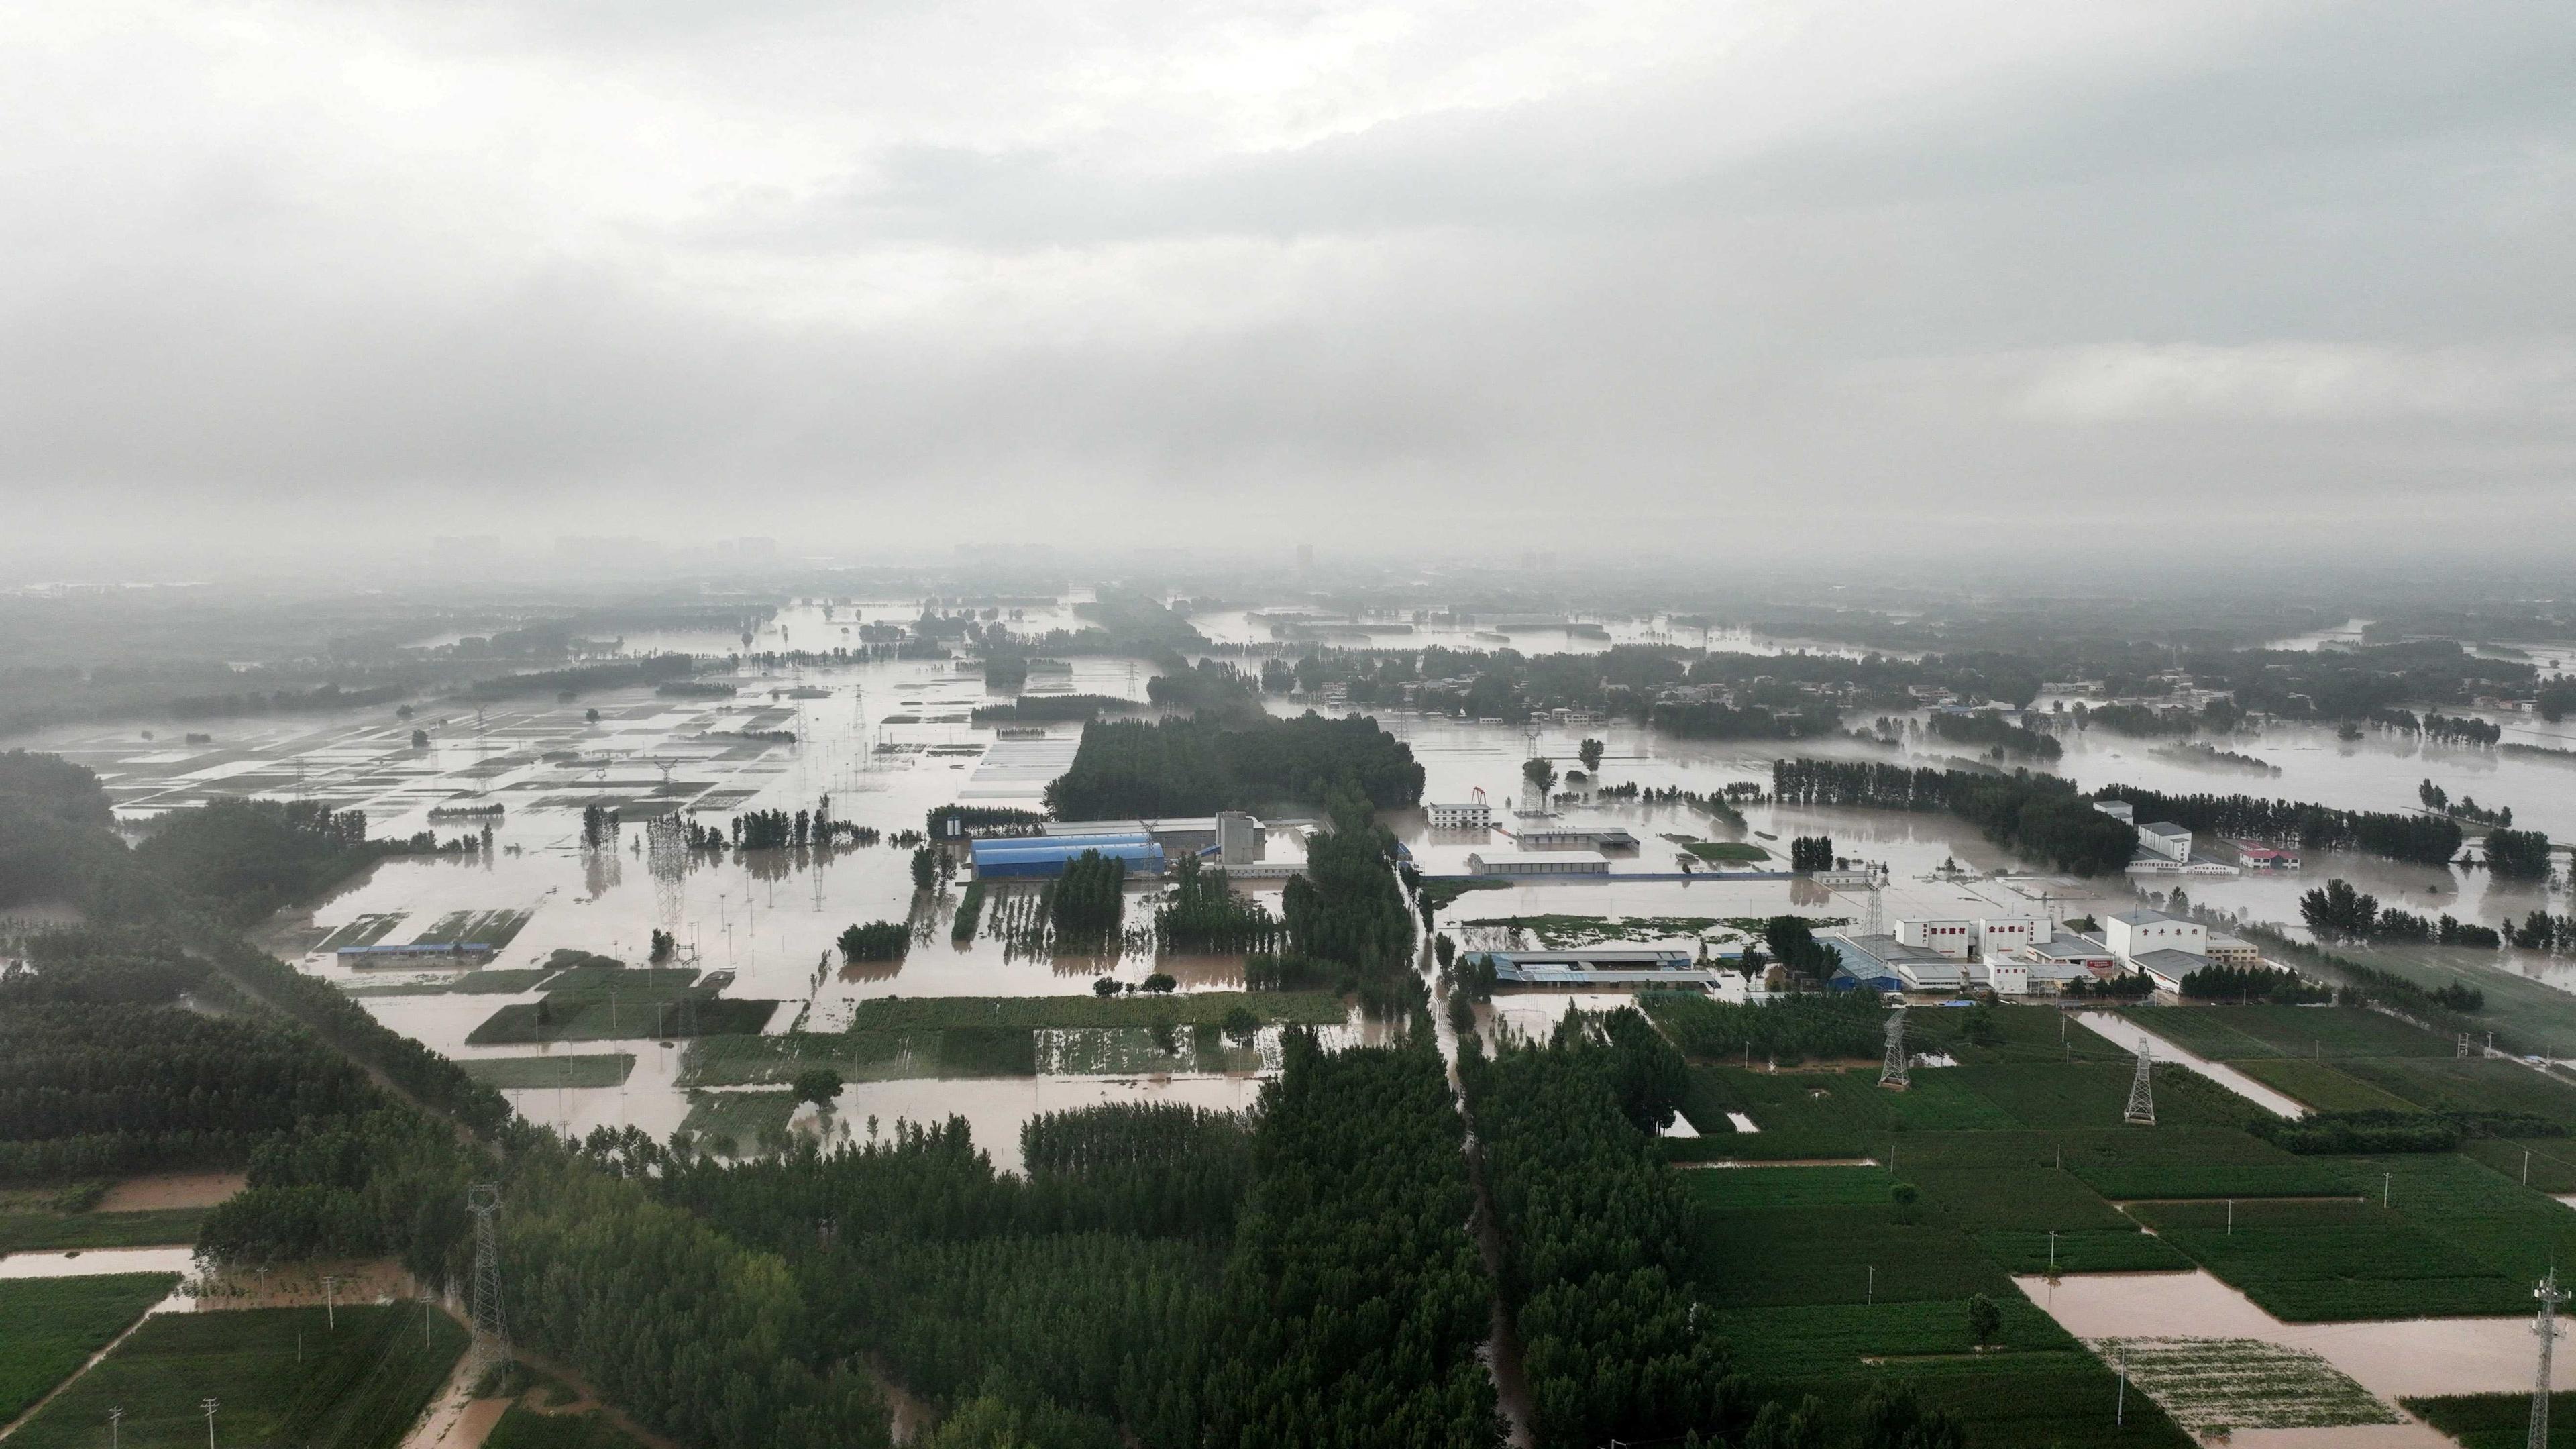 2023-08-11T062855Z_1620012375_RC2HL2AYQ6GD_RTRMADP_3_CLIMATE-CHANGE-CHINA-WEATHER